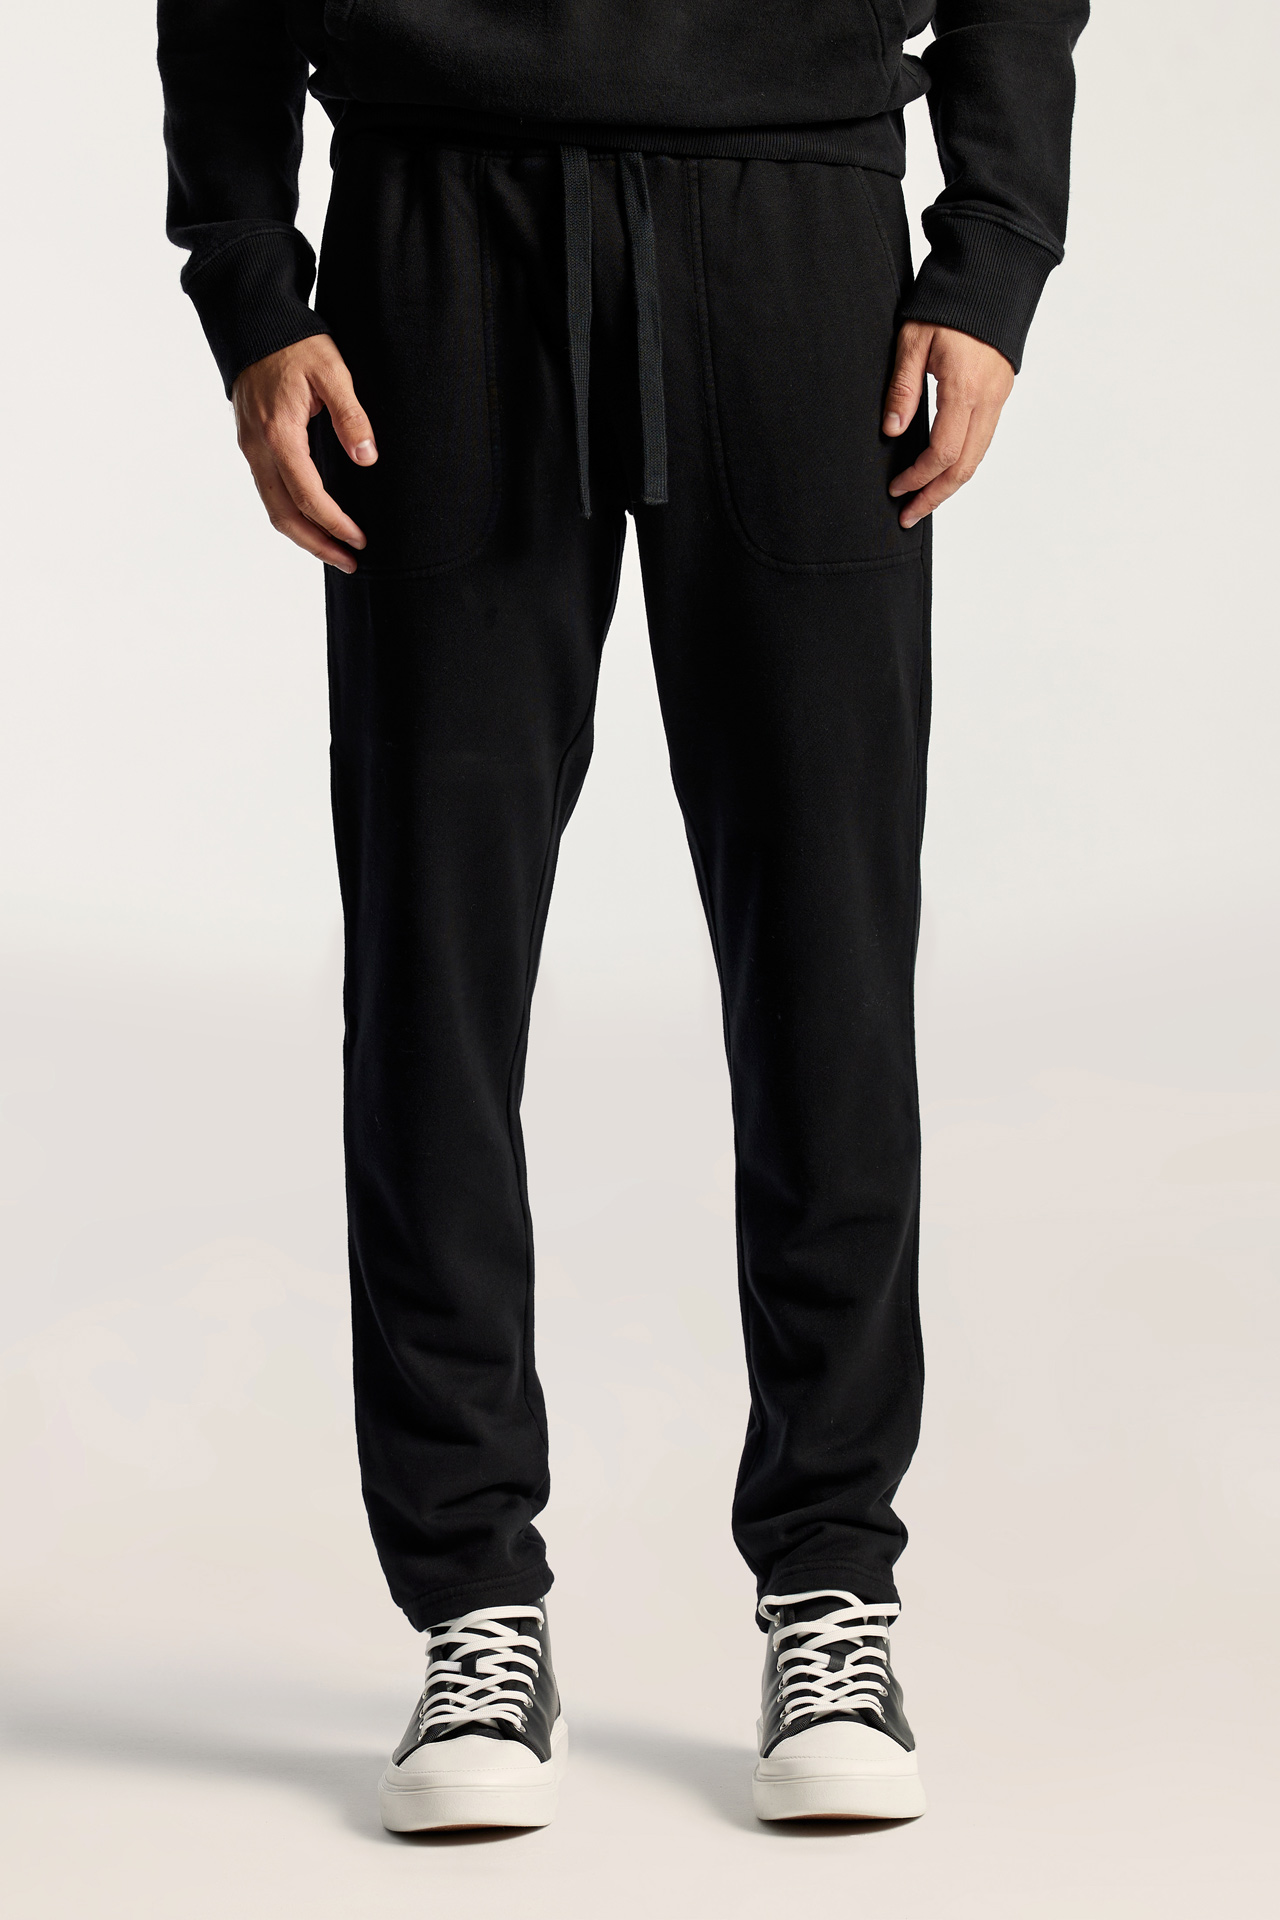 Regular Fit With Stitch Detailing Sweatpants